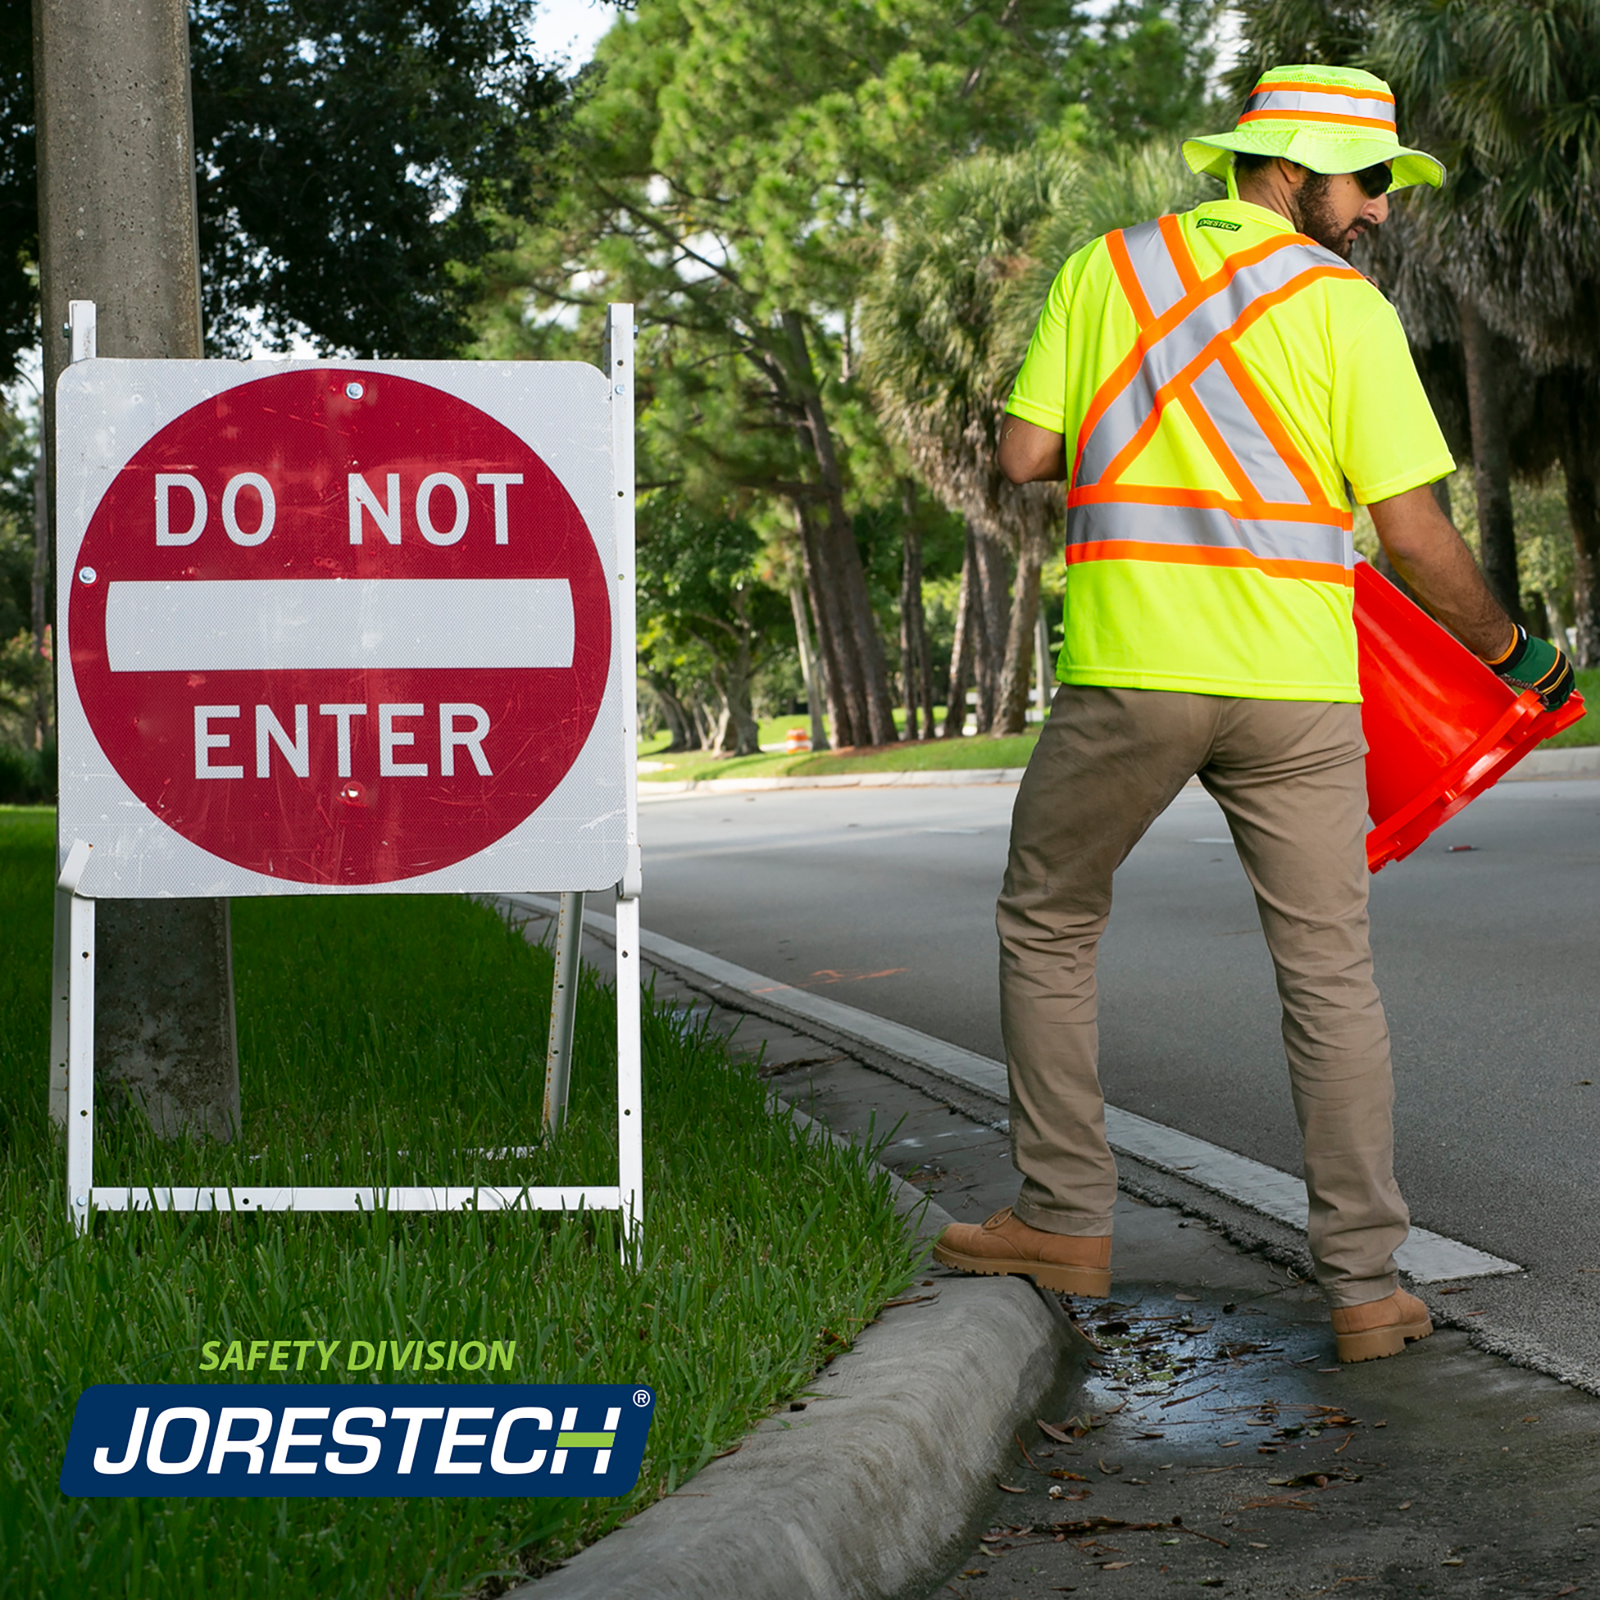 A worker wearing a JORESTECH safety shirt. He is placing signals in the middle of the road to direct the traffic.